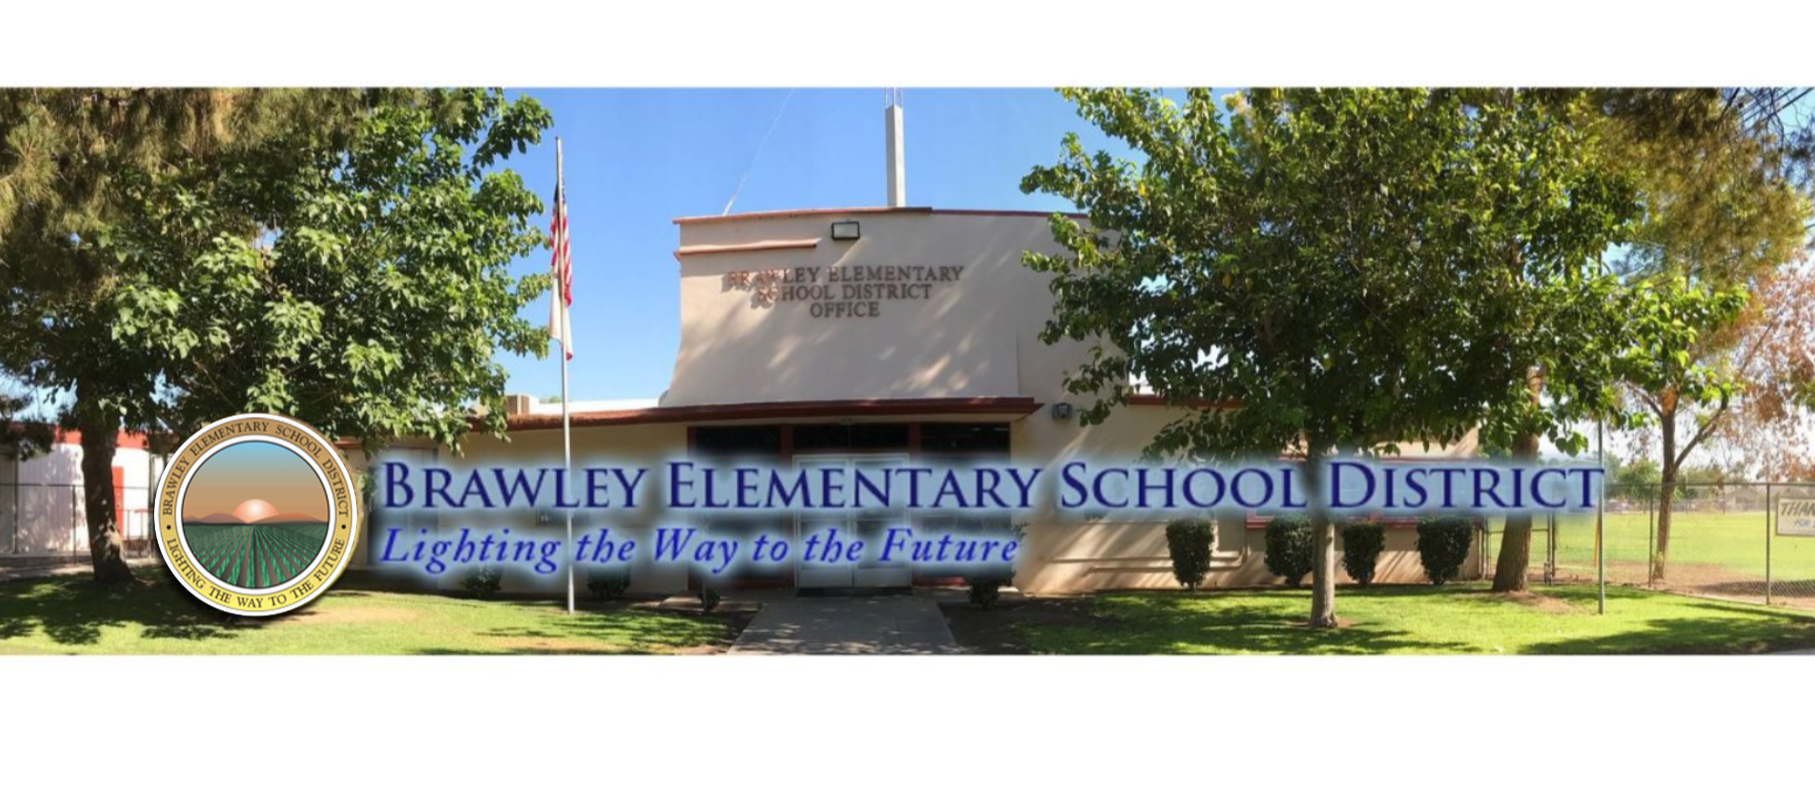 Brawley Elementary School District Lighting the way to the future.